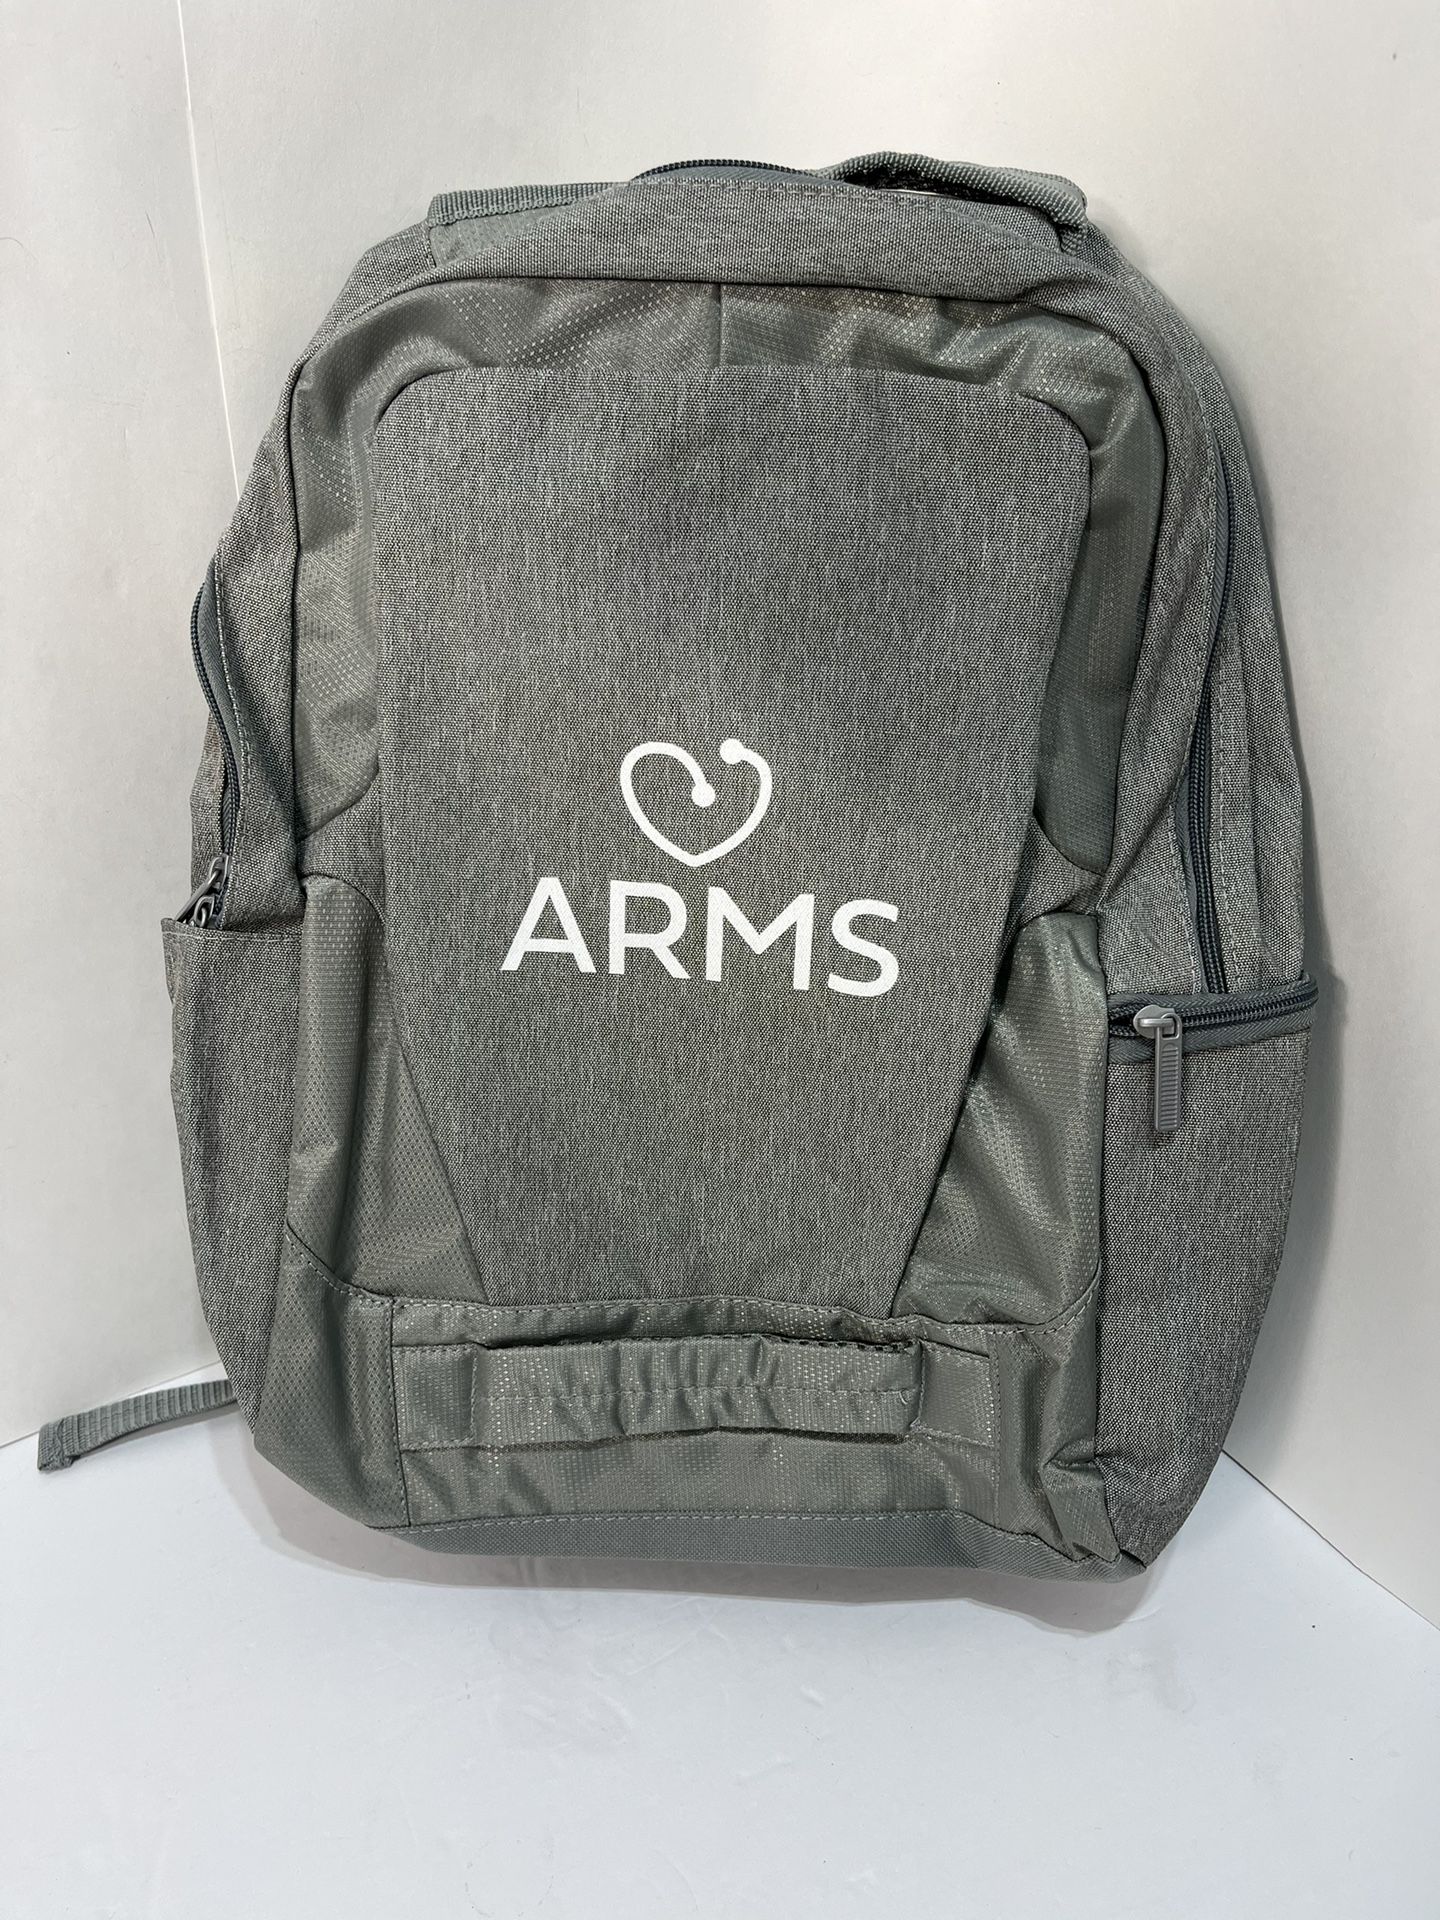 ARMS Nurse Backpack with Wire, Gray, Preowned 